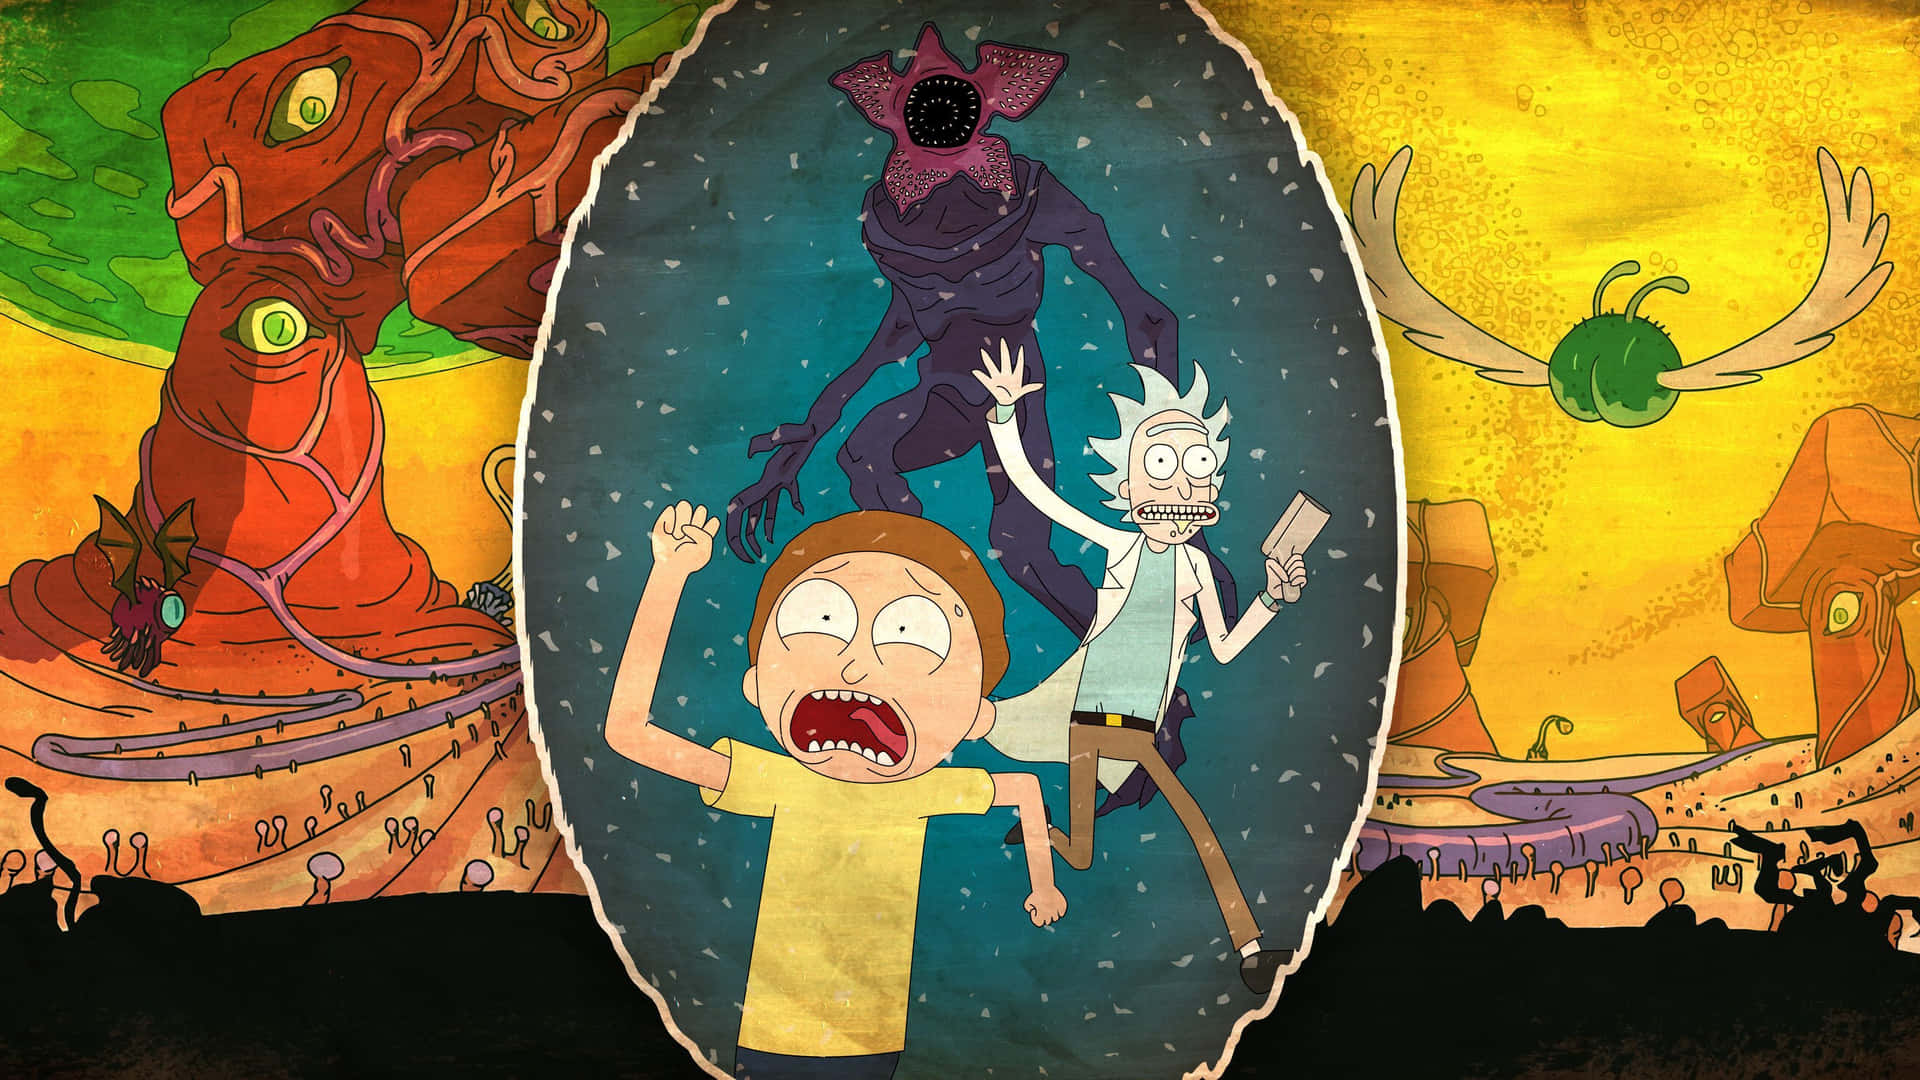 "A Rick And Morty Laptop For All Your Interdimensional Adventures!" Wallpaper